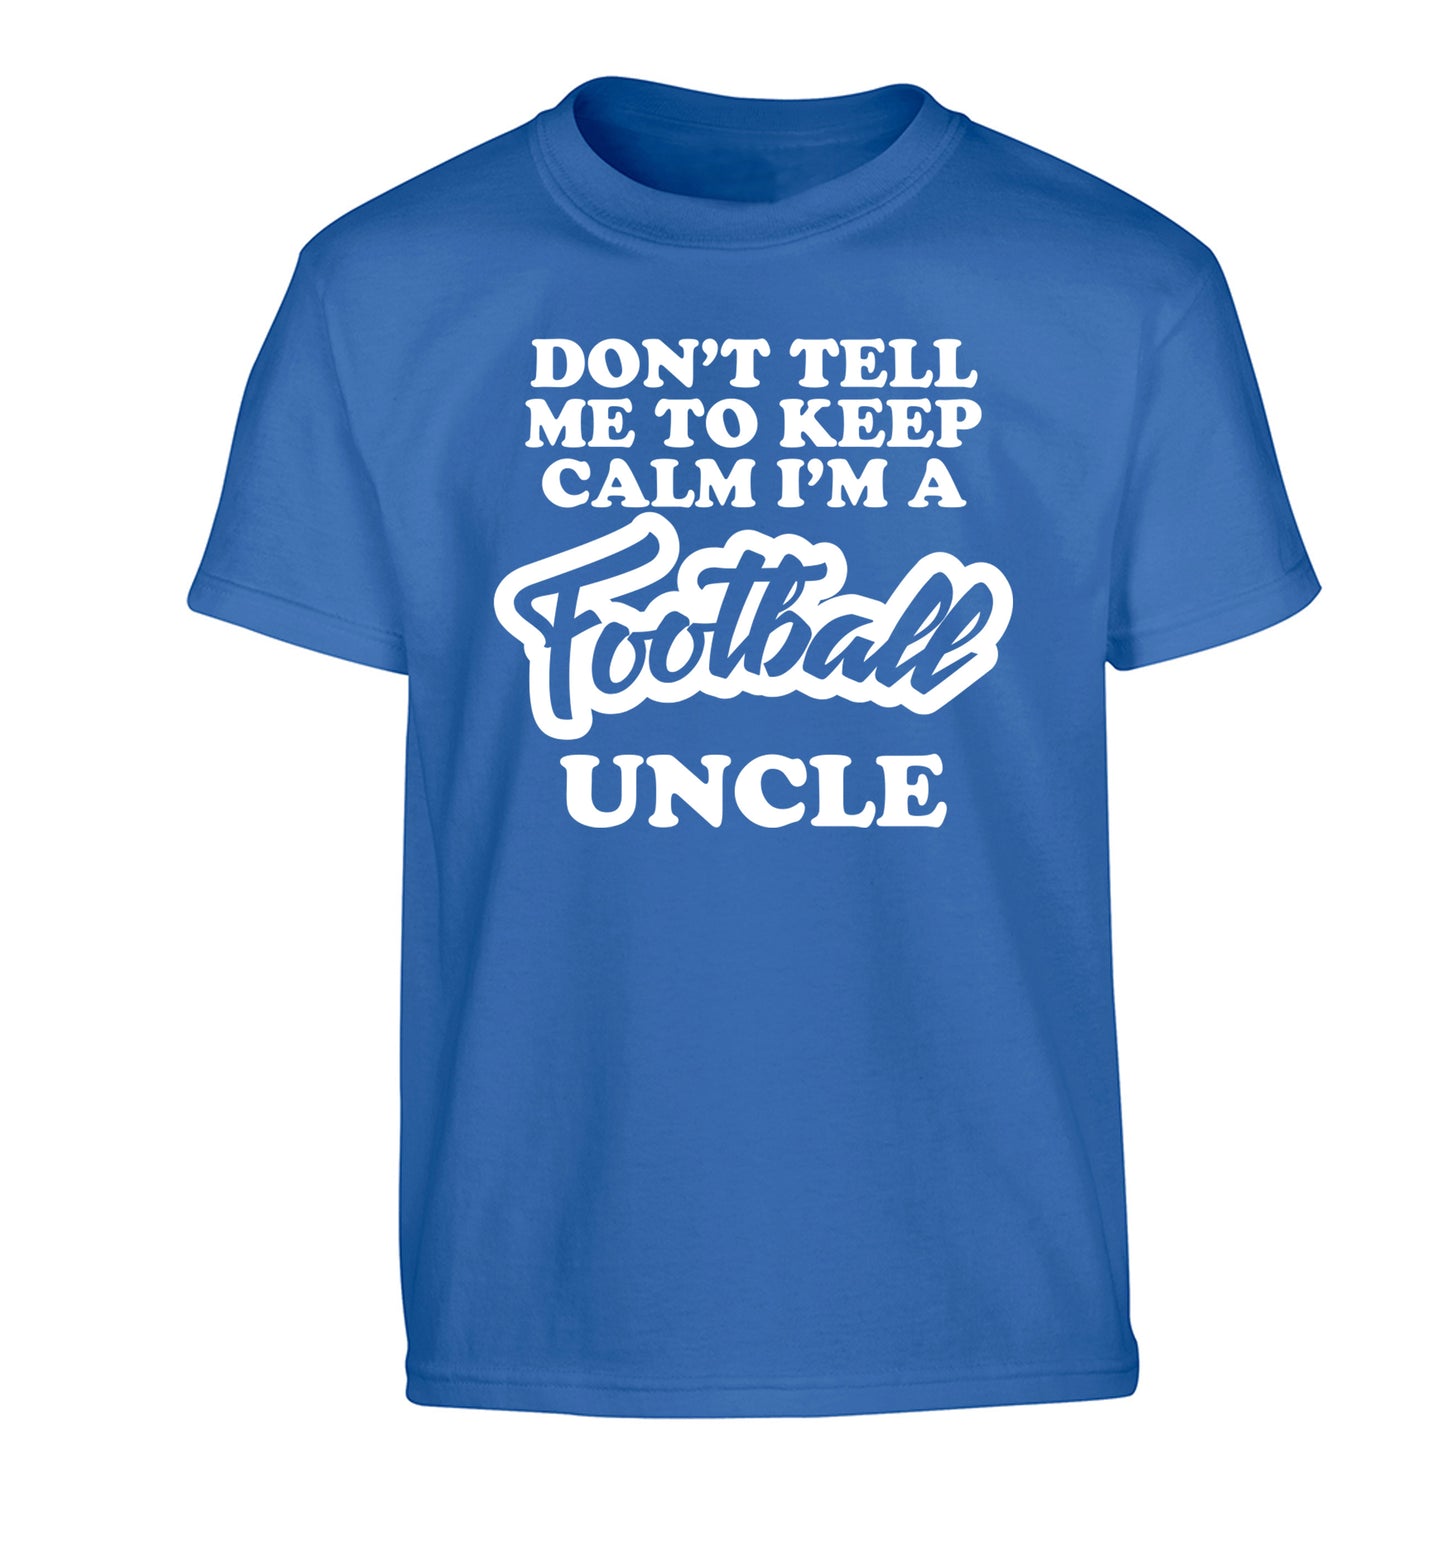 Worlds most amazing football uncle Children's blue Tshirt 12-14 Years